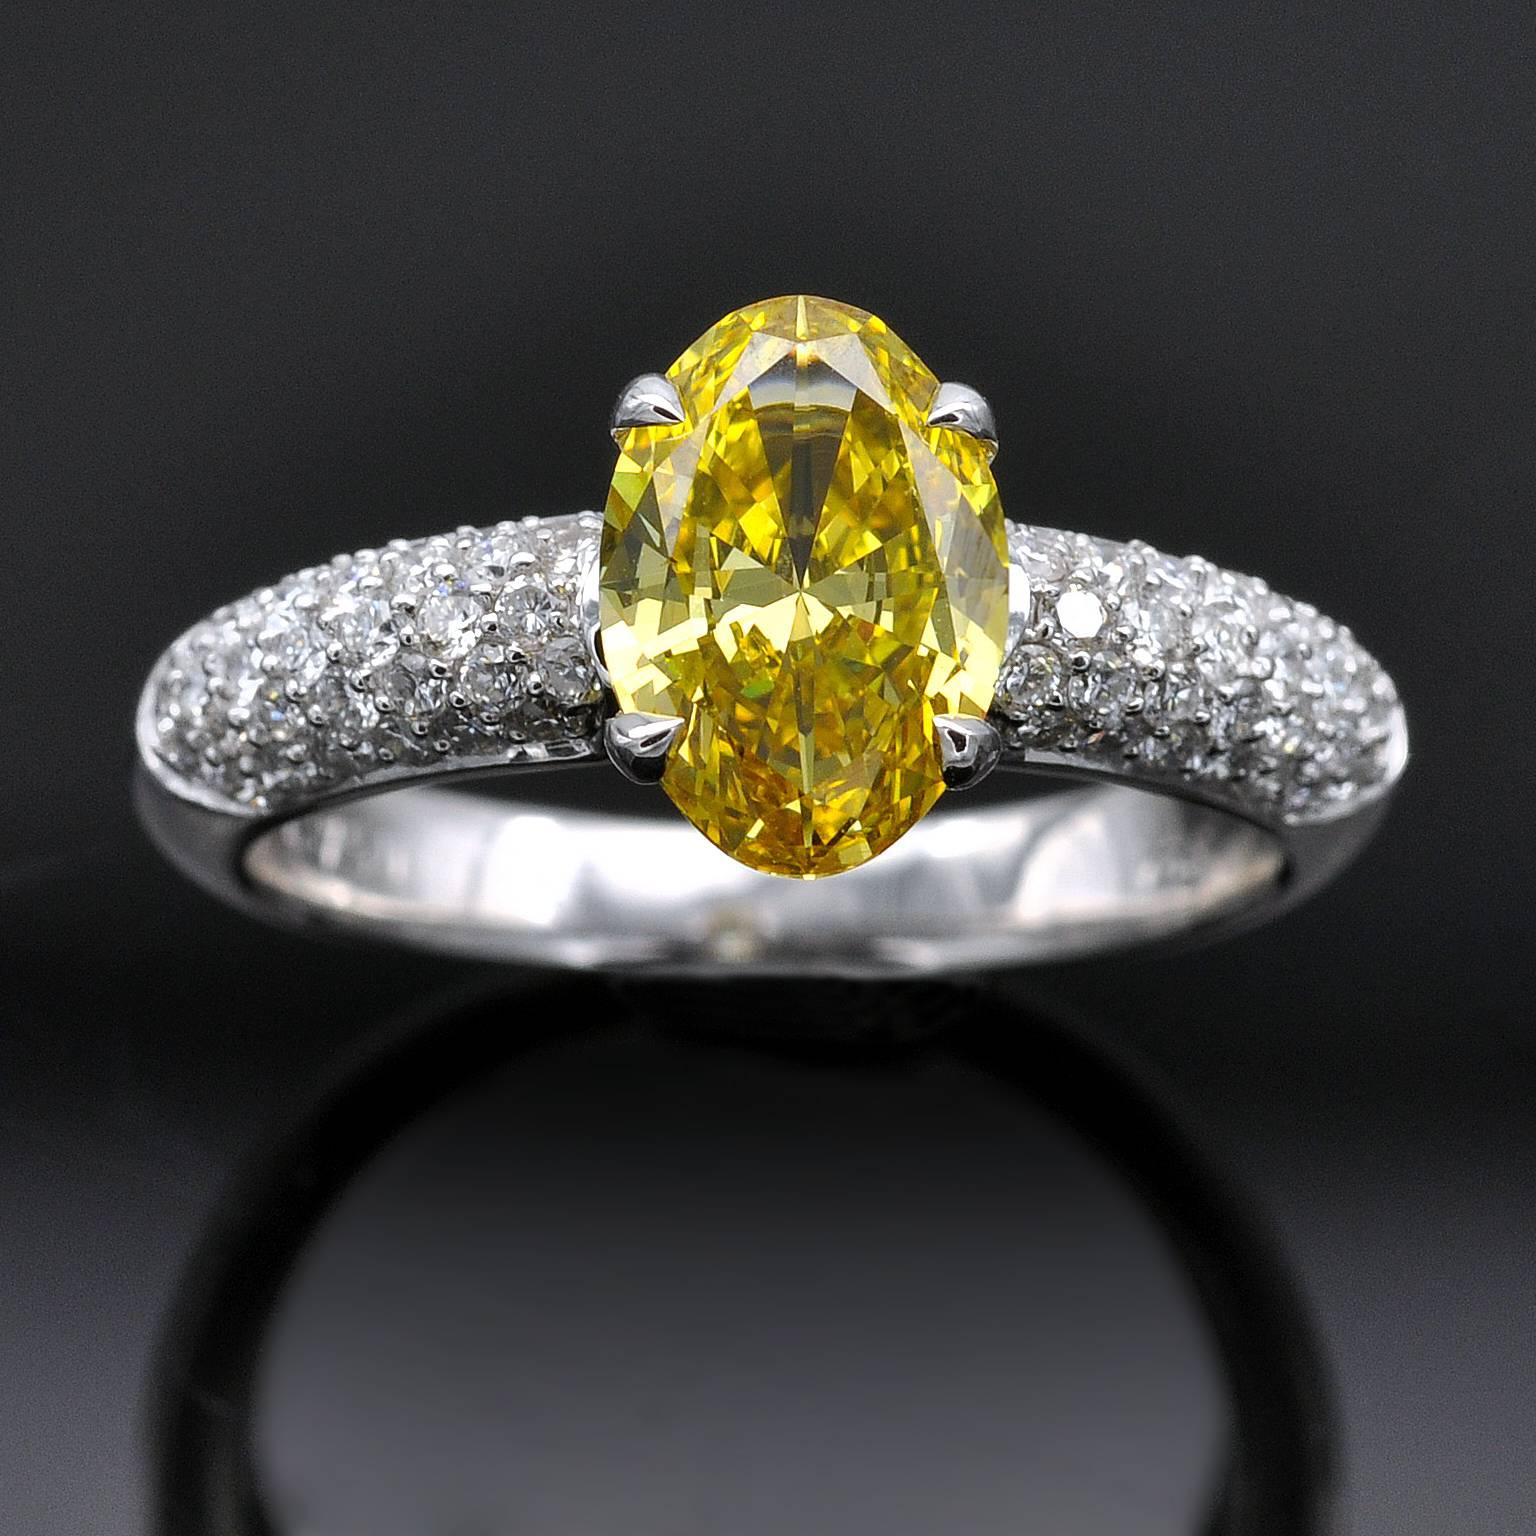 A very fine diamond engagement ring. Set in its center an oval fancy vivid yellow diamond weighing 1.36 cts. Its rich color is the most desirable : vivid in tone and hue (not deep or dark just vibrant). Its shape, an elegant oval very well cut: with